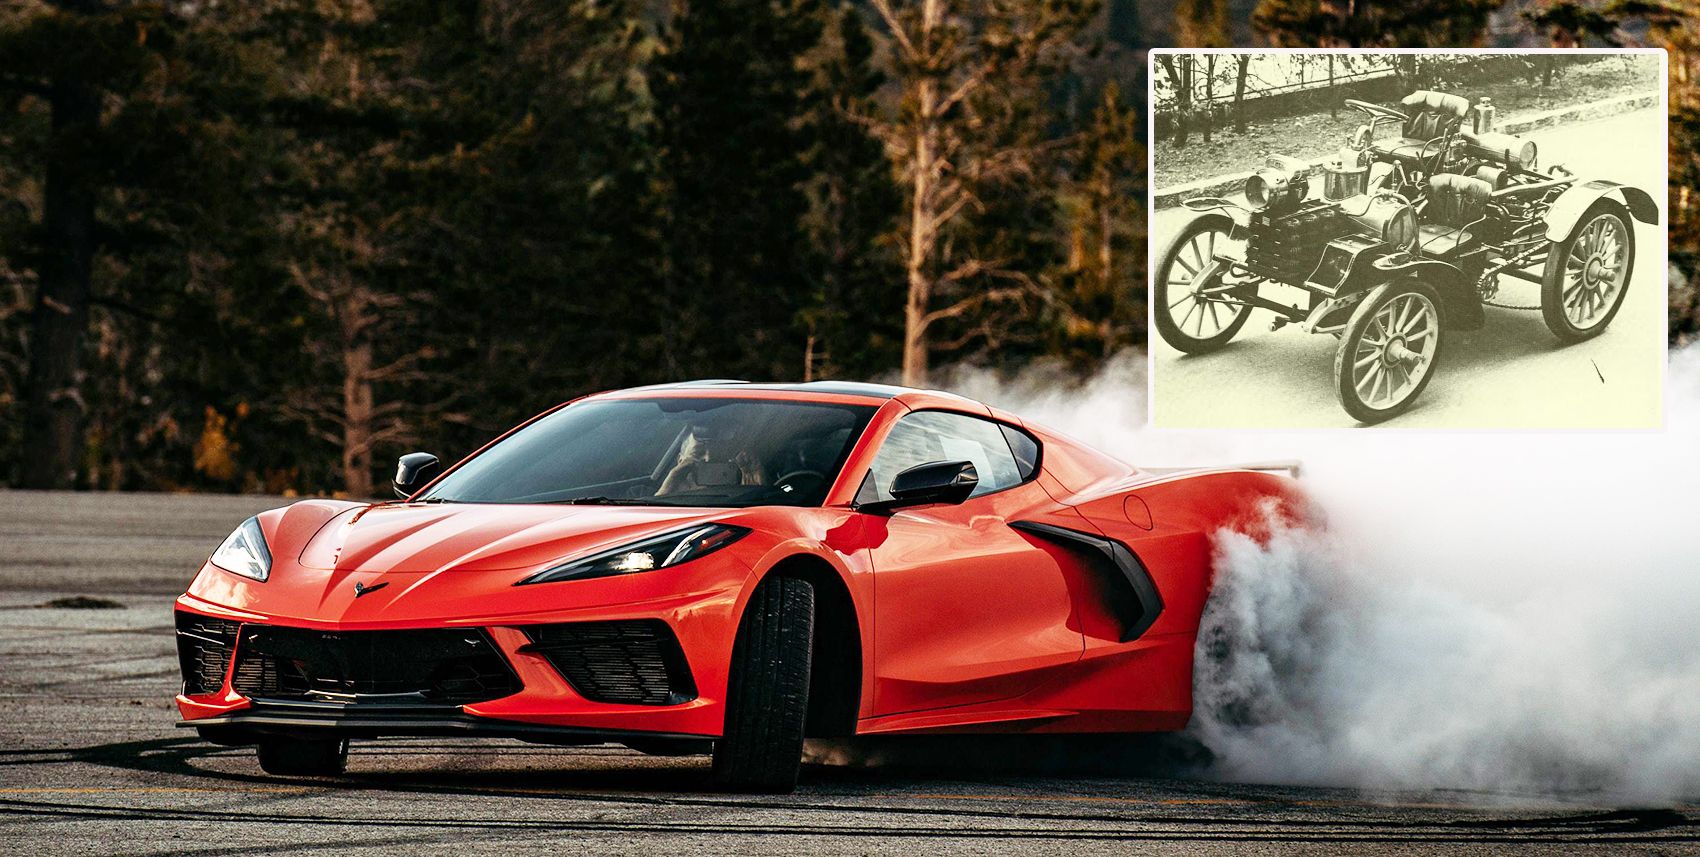 The Evolution Of The Sports Car...And How They Became So Fast